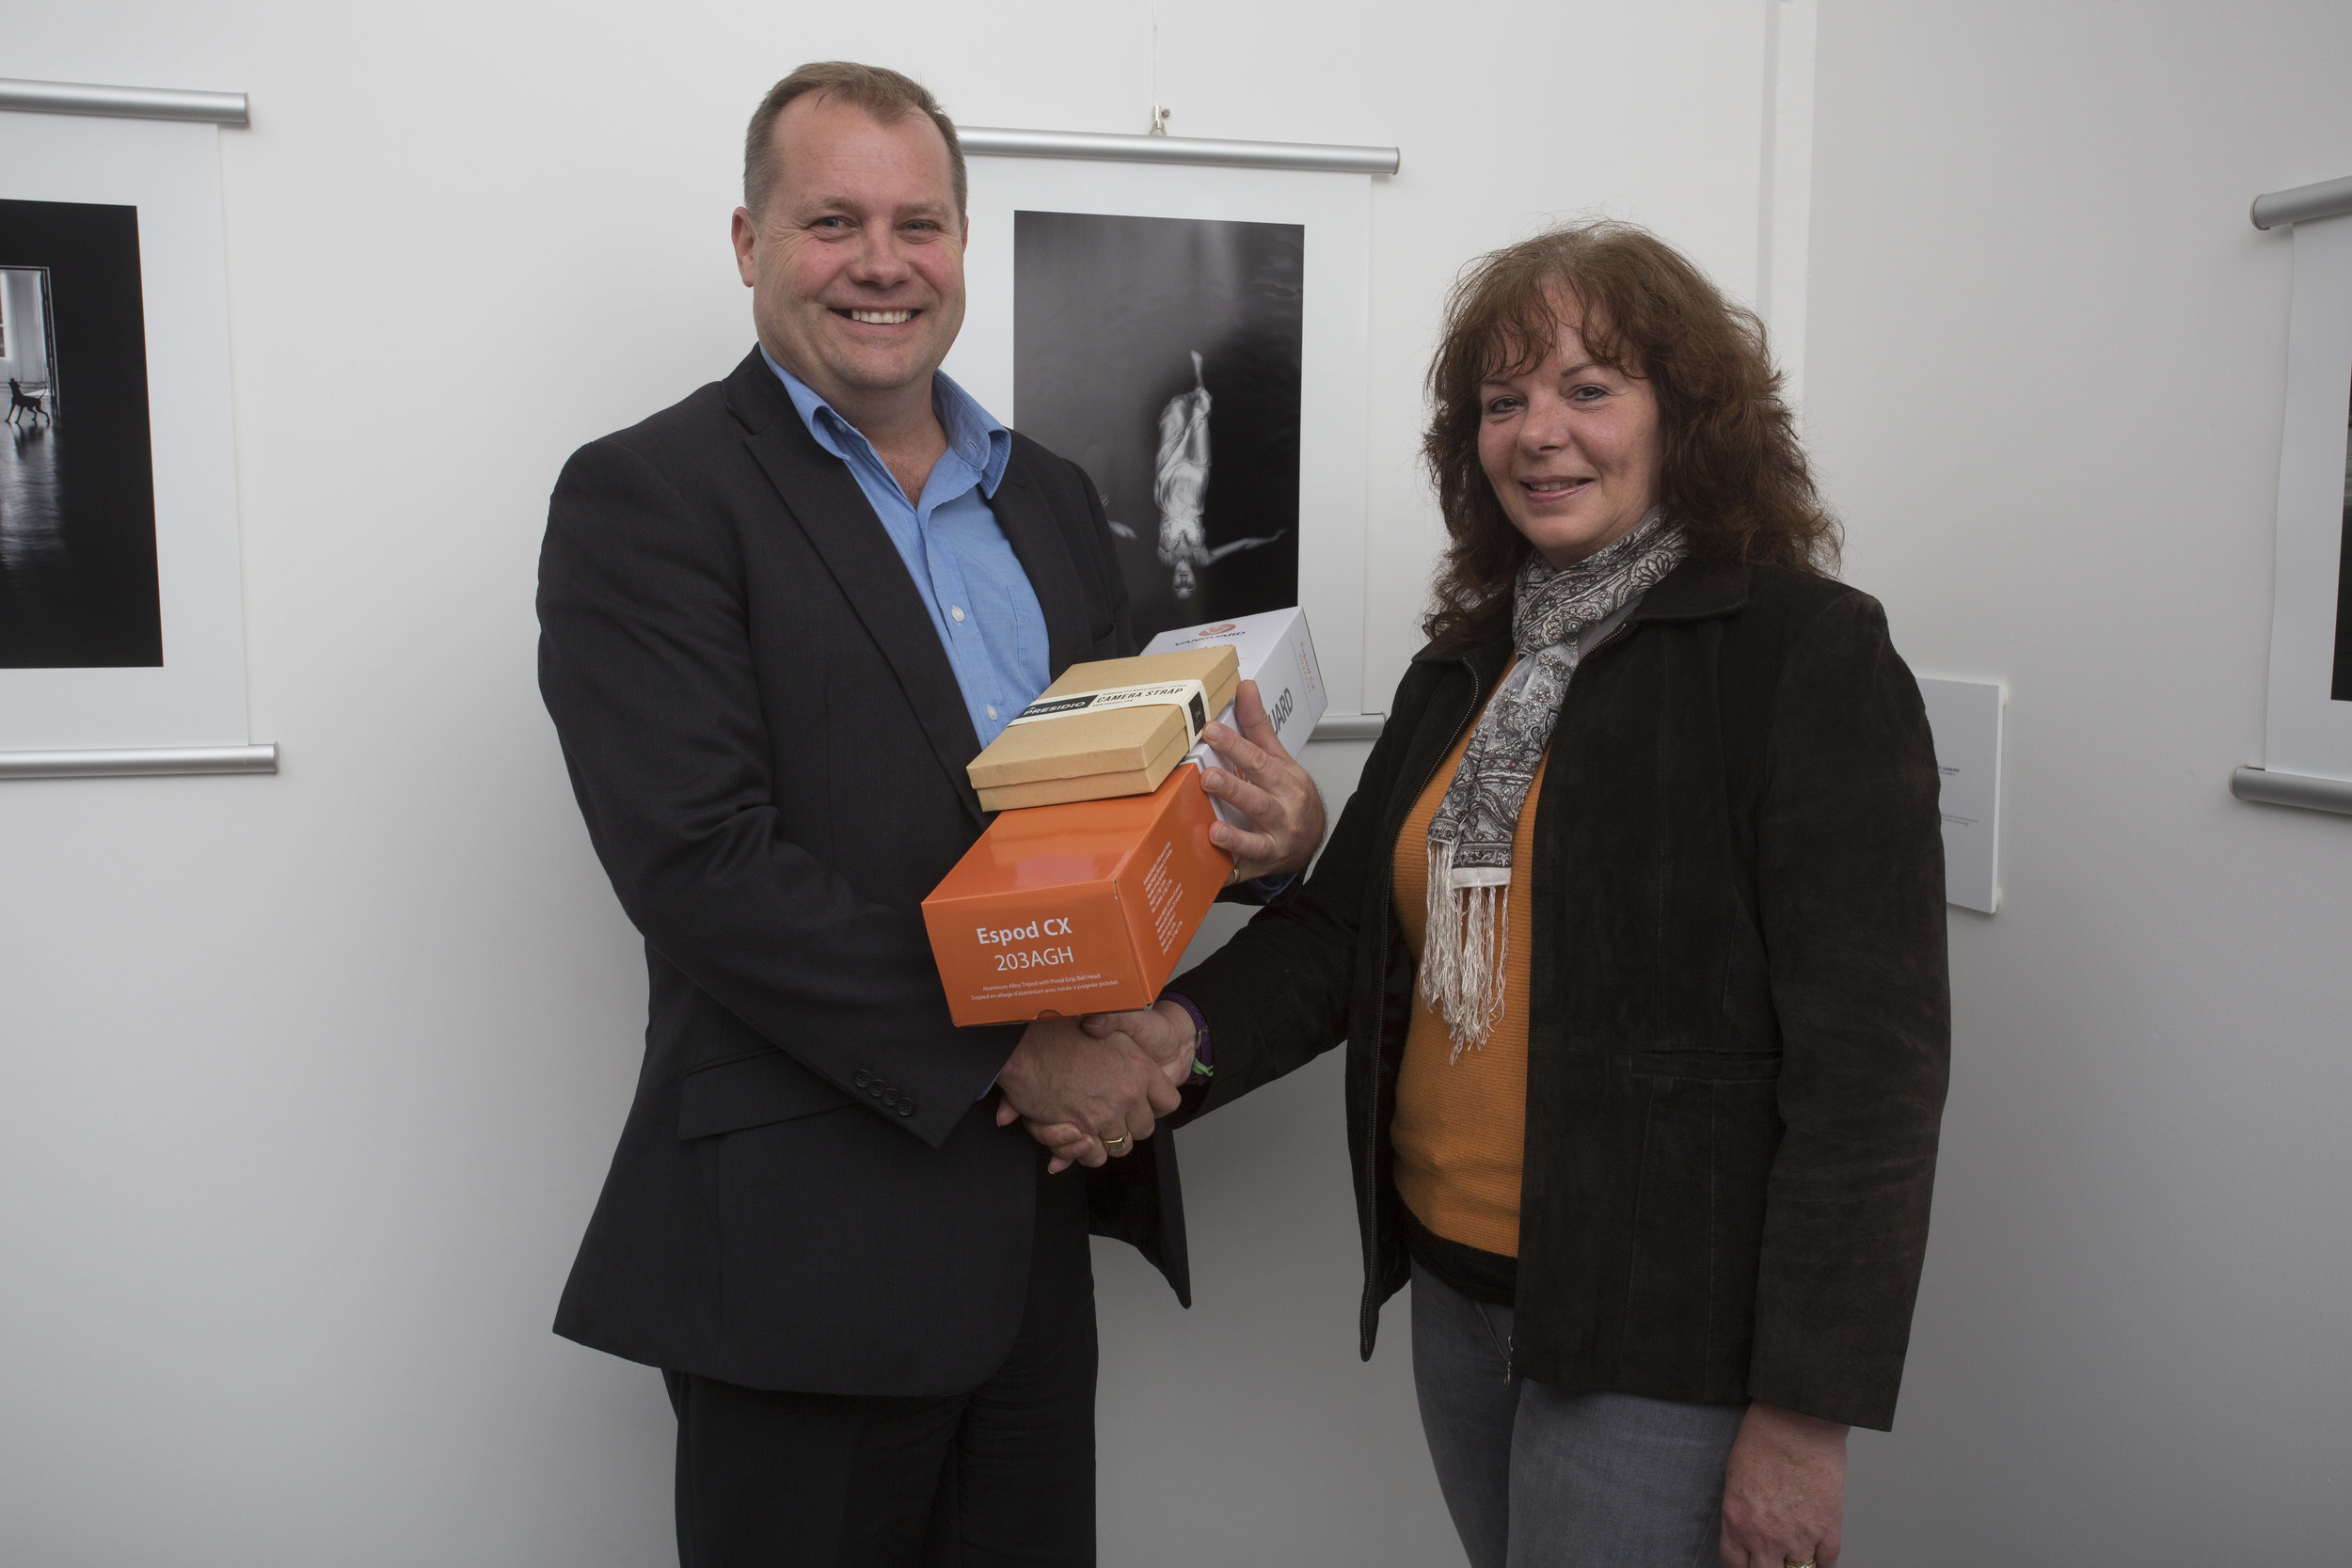  Gerard Emery from CRK hands over the Vanguard prize pack to third-placing Monochrome photographer, Karen Moffat-Mcleod 